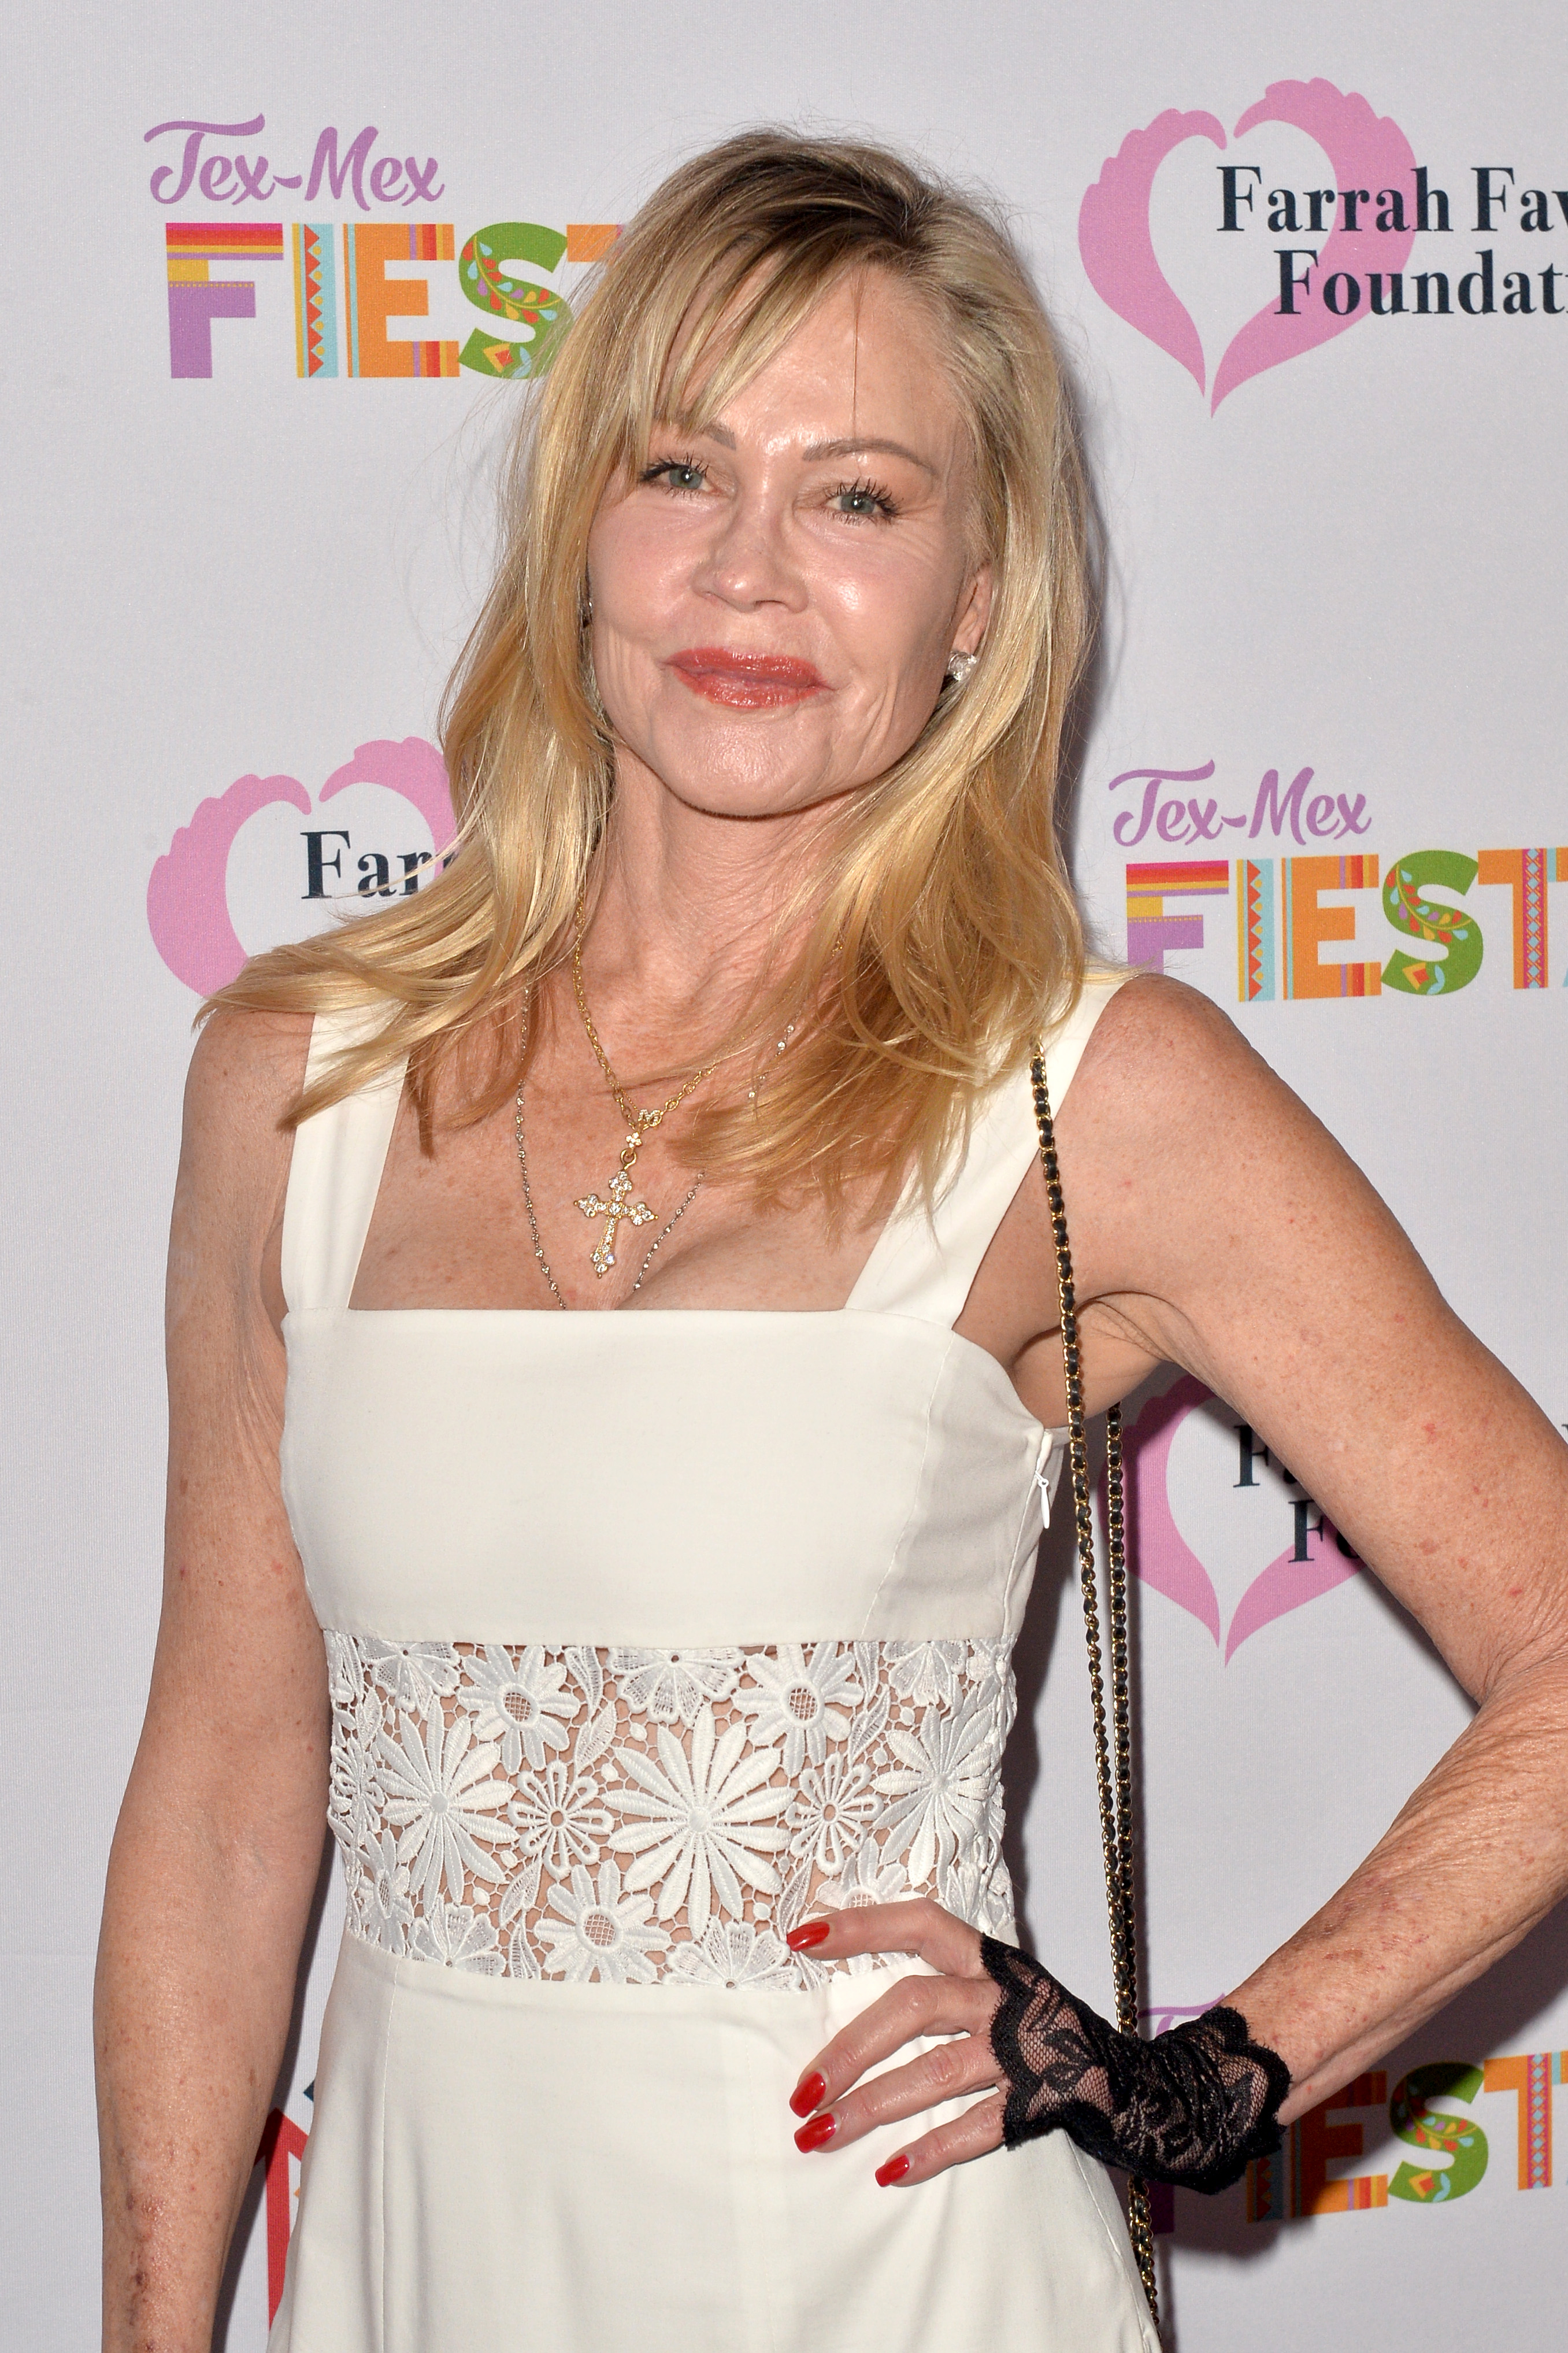 Melanie Griffith, seen in a white dress with a cutout at The Farrah Fawcett Foundation’s Tex-Mex Fiesta at Wallis Annenberg Center for the Performing Arts in 2019, has been proudly showing off her looks